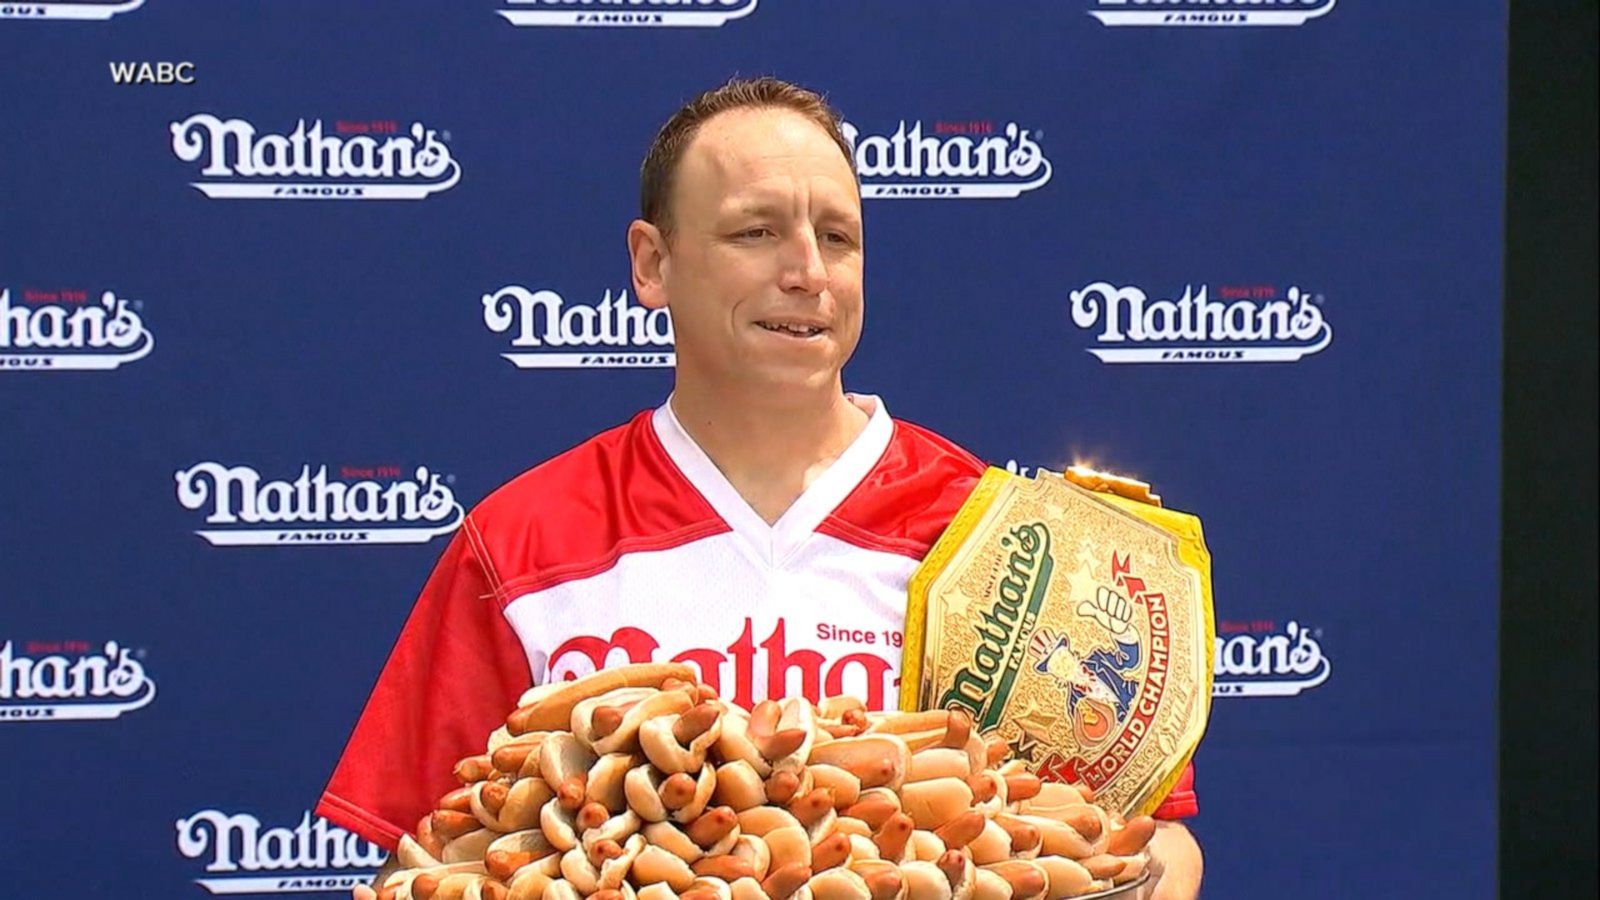 VIDEO: Nathan’s annual July Fourth hot dog eating contest tomorrow